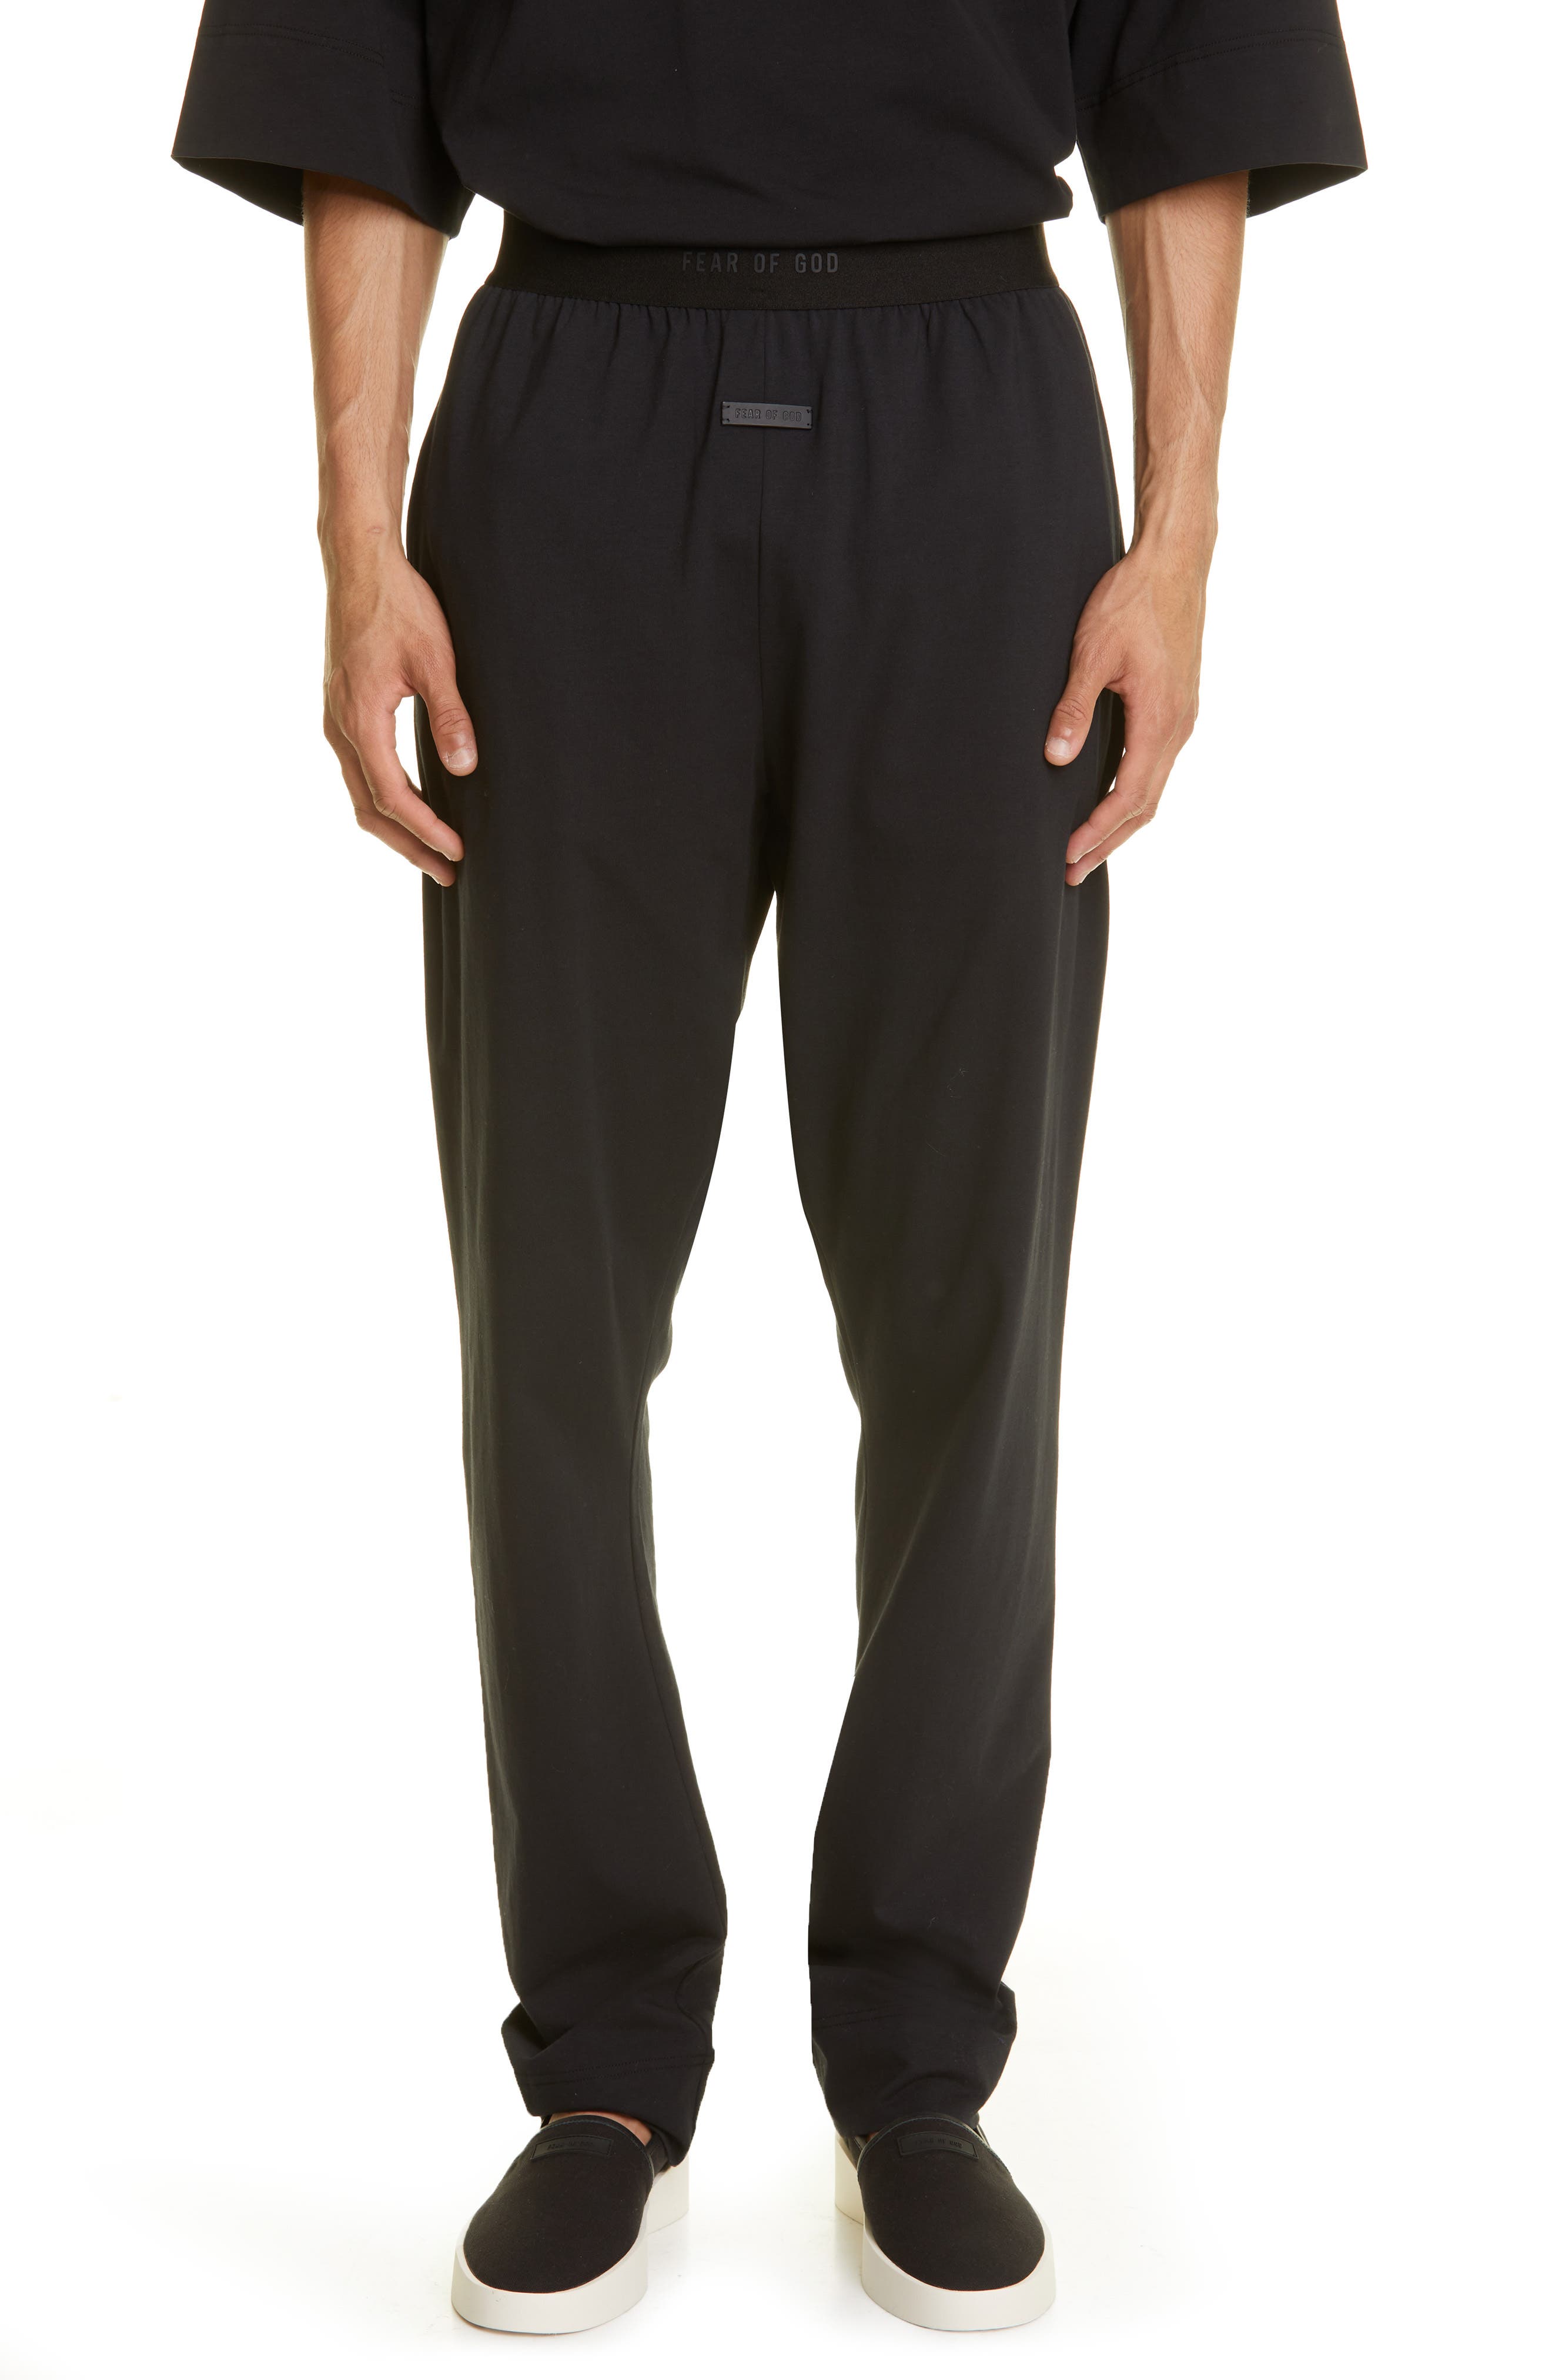 Fear of God Stretch Cotton Lounge Pants in Black at Nordstrom, Size X-Small